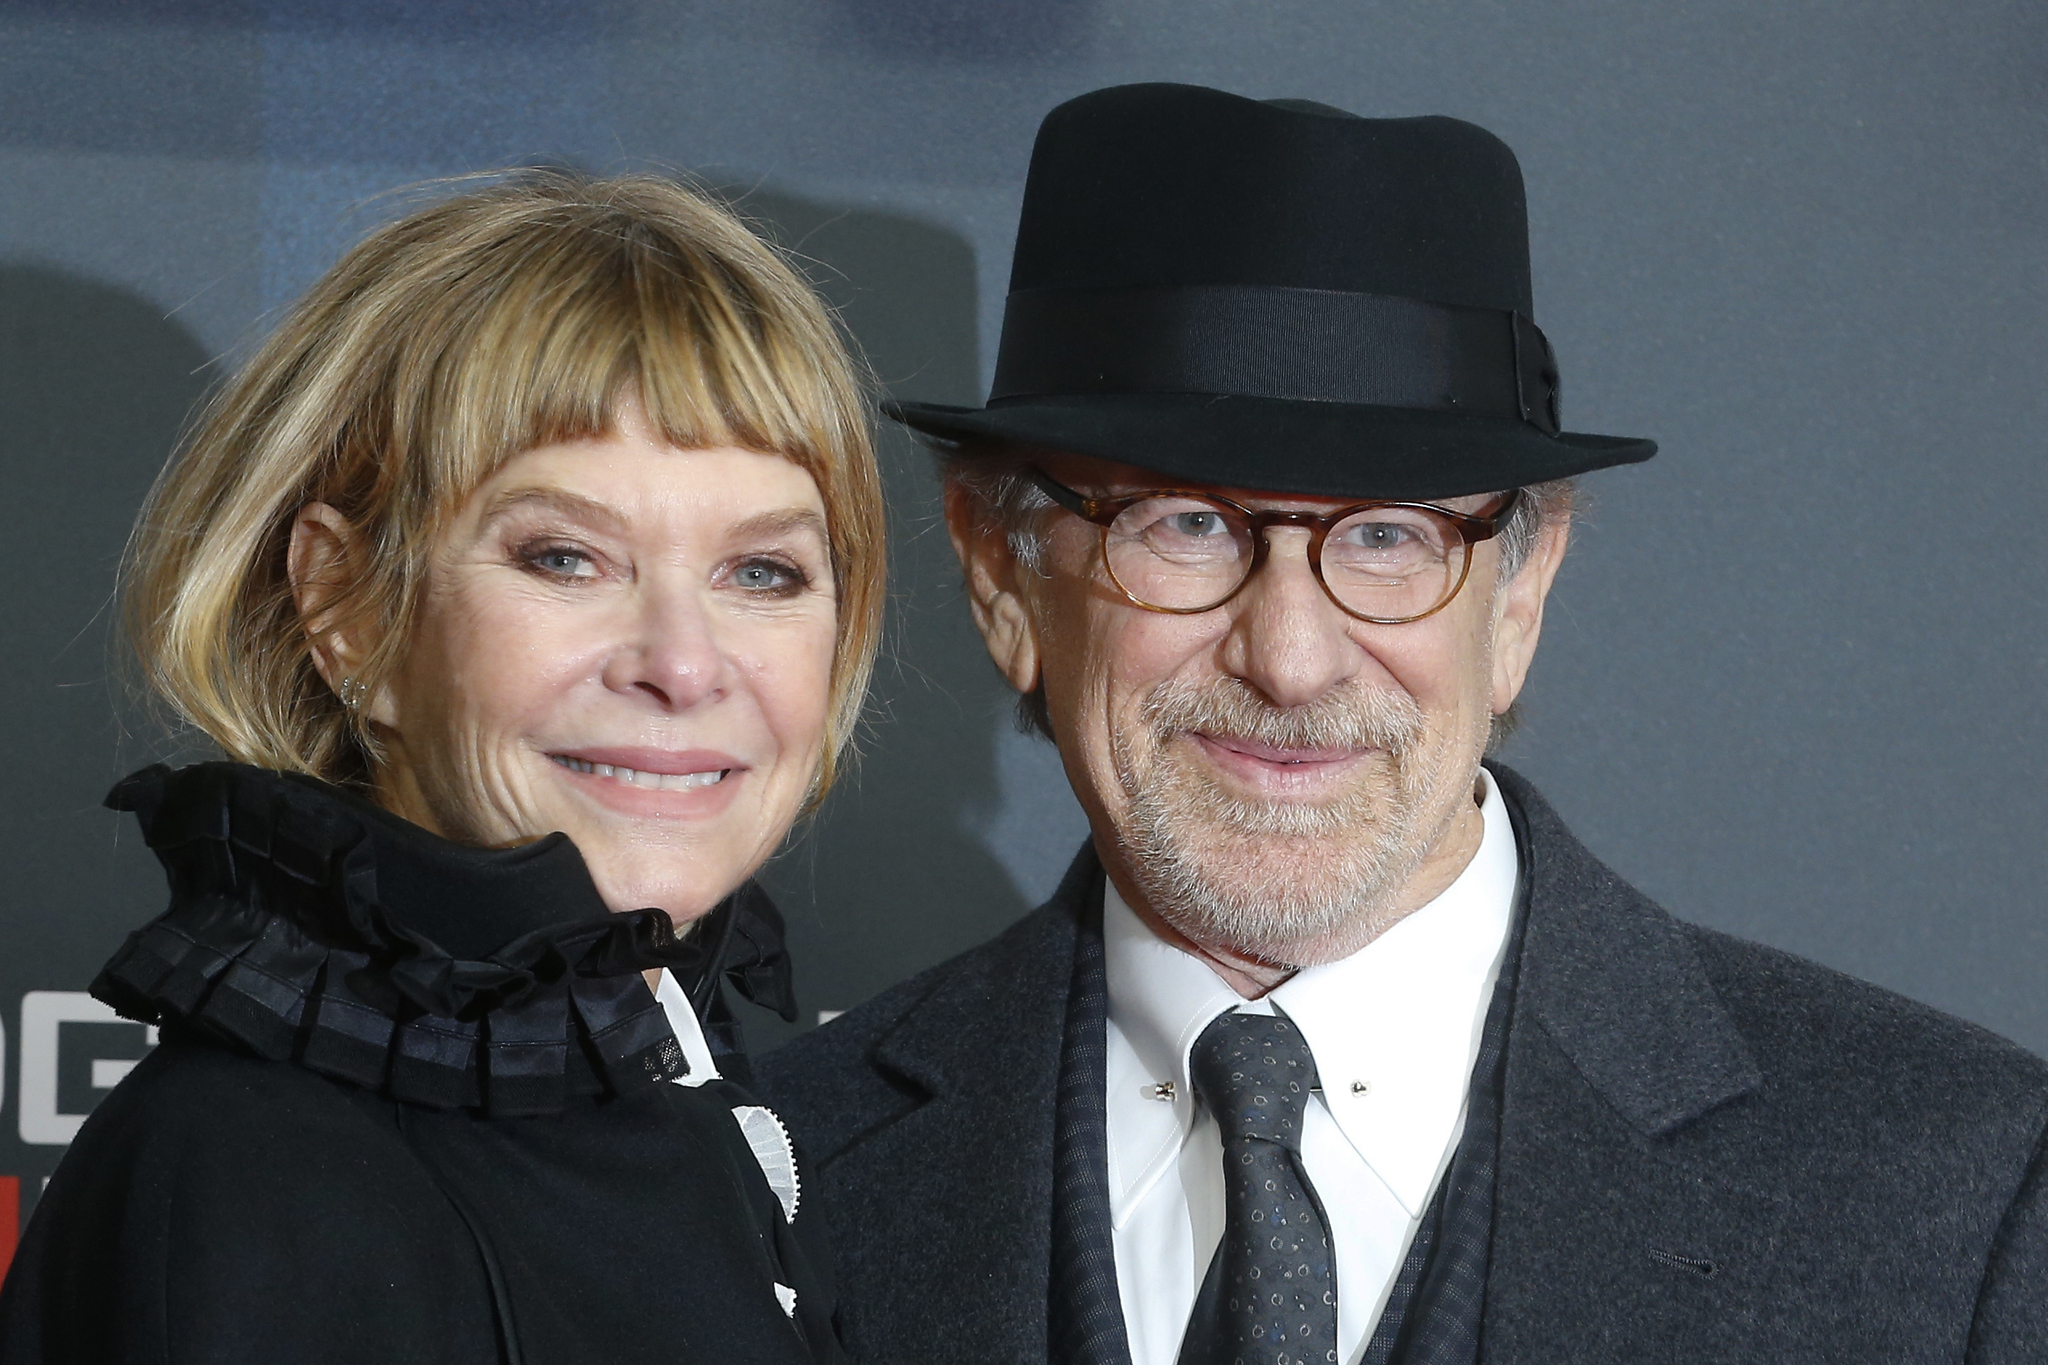 Steven Spielberg and Kate Capshaw at event of Snipu tiltas (2015)